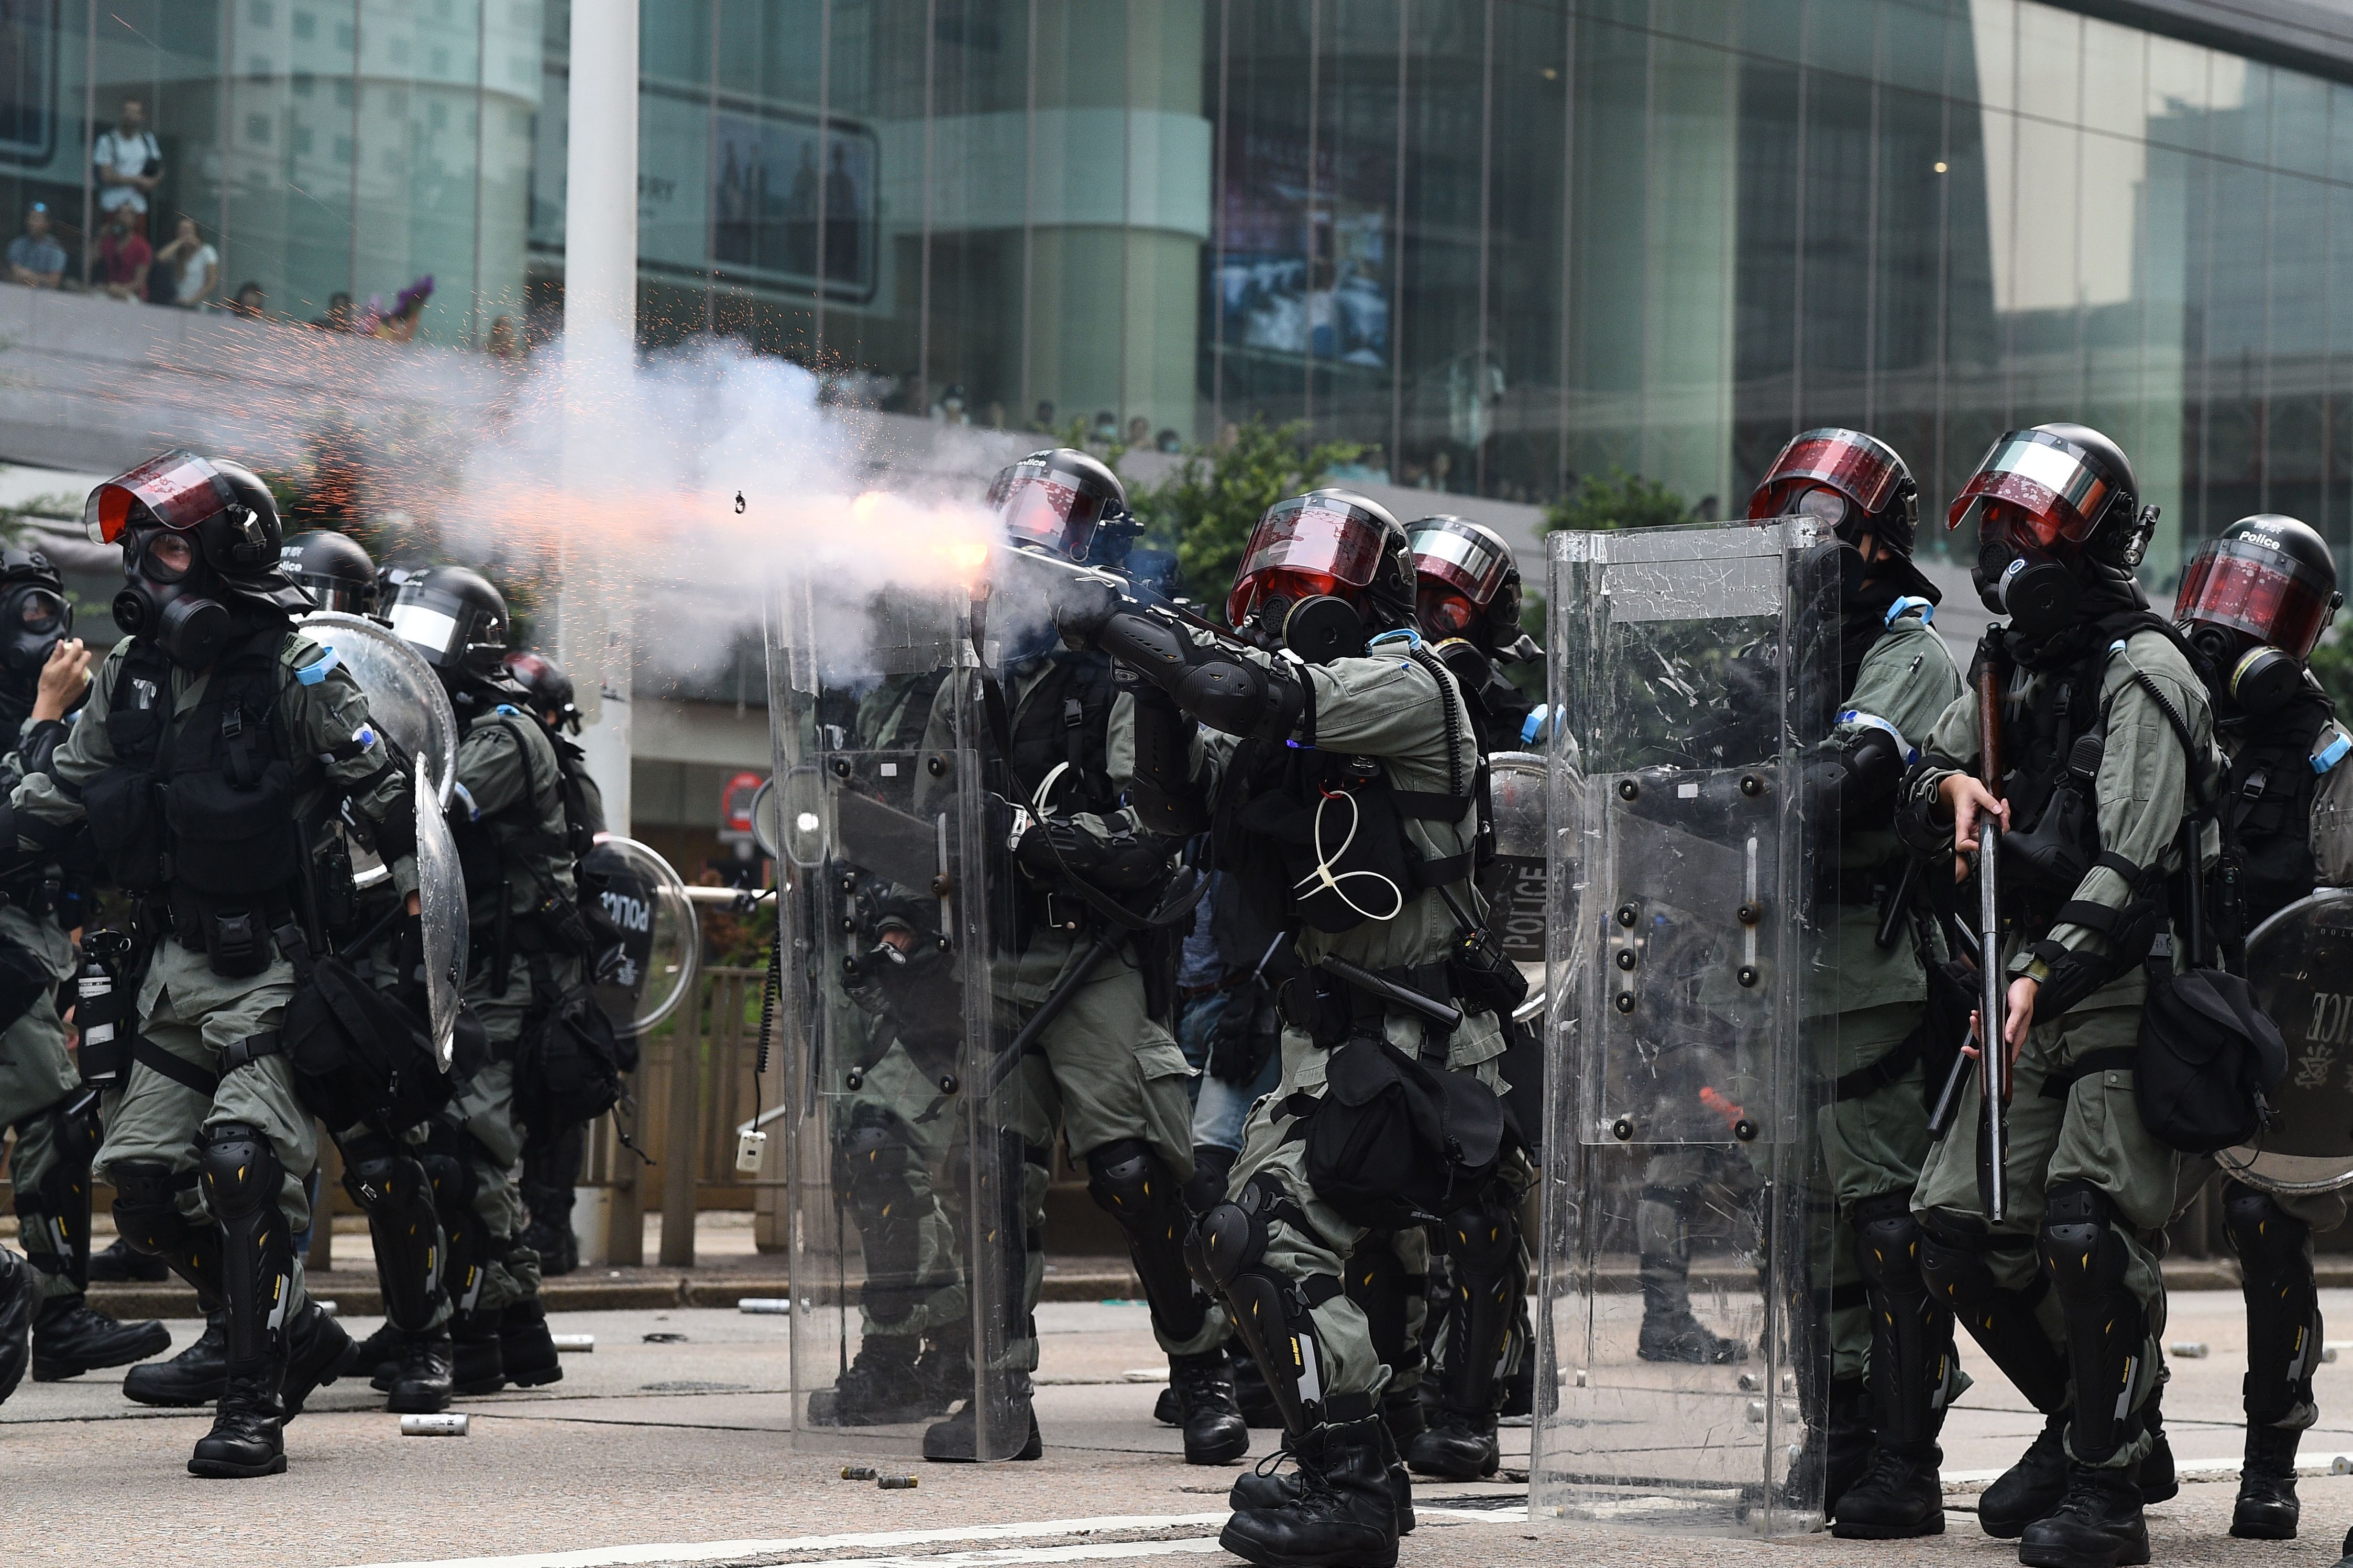 Hong Kong police fire tear gas toward protesters taking part in an unsanctioned march through the streets of Hong Kong on September 29